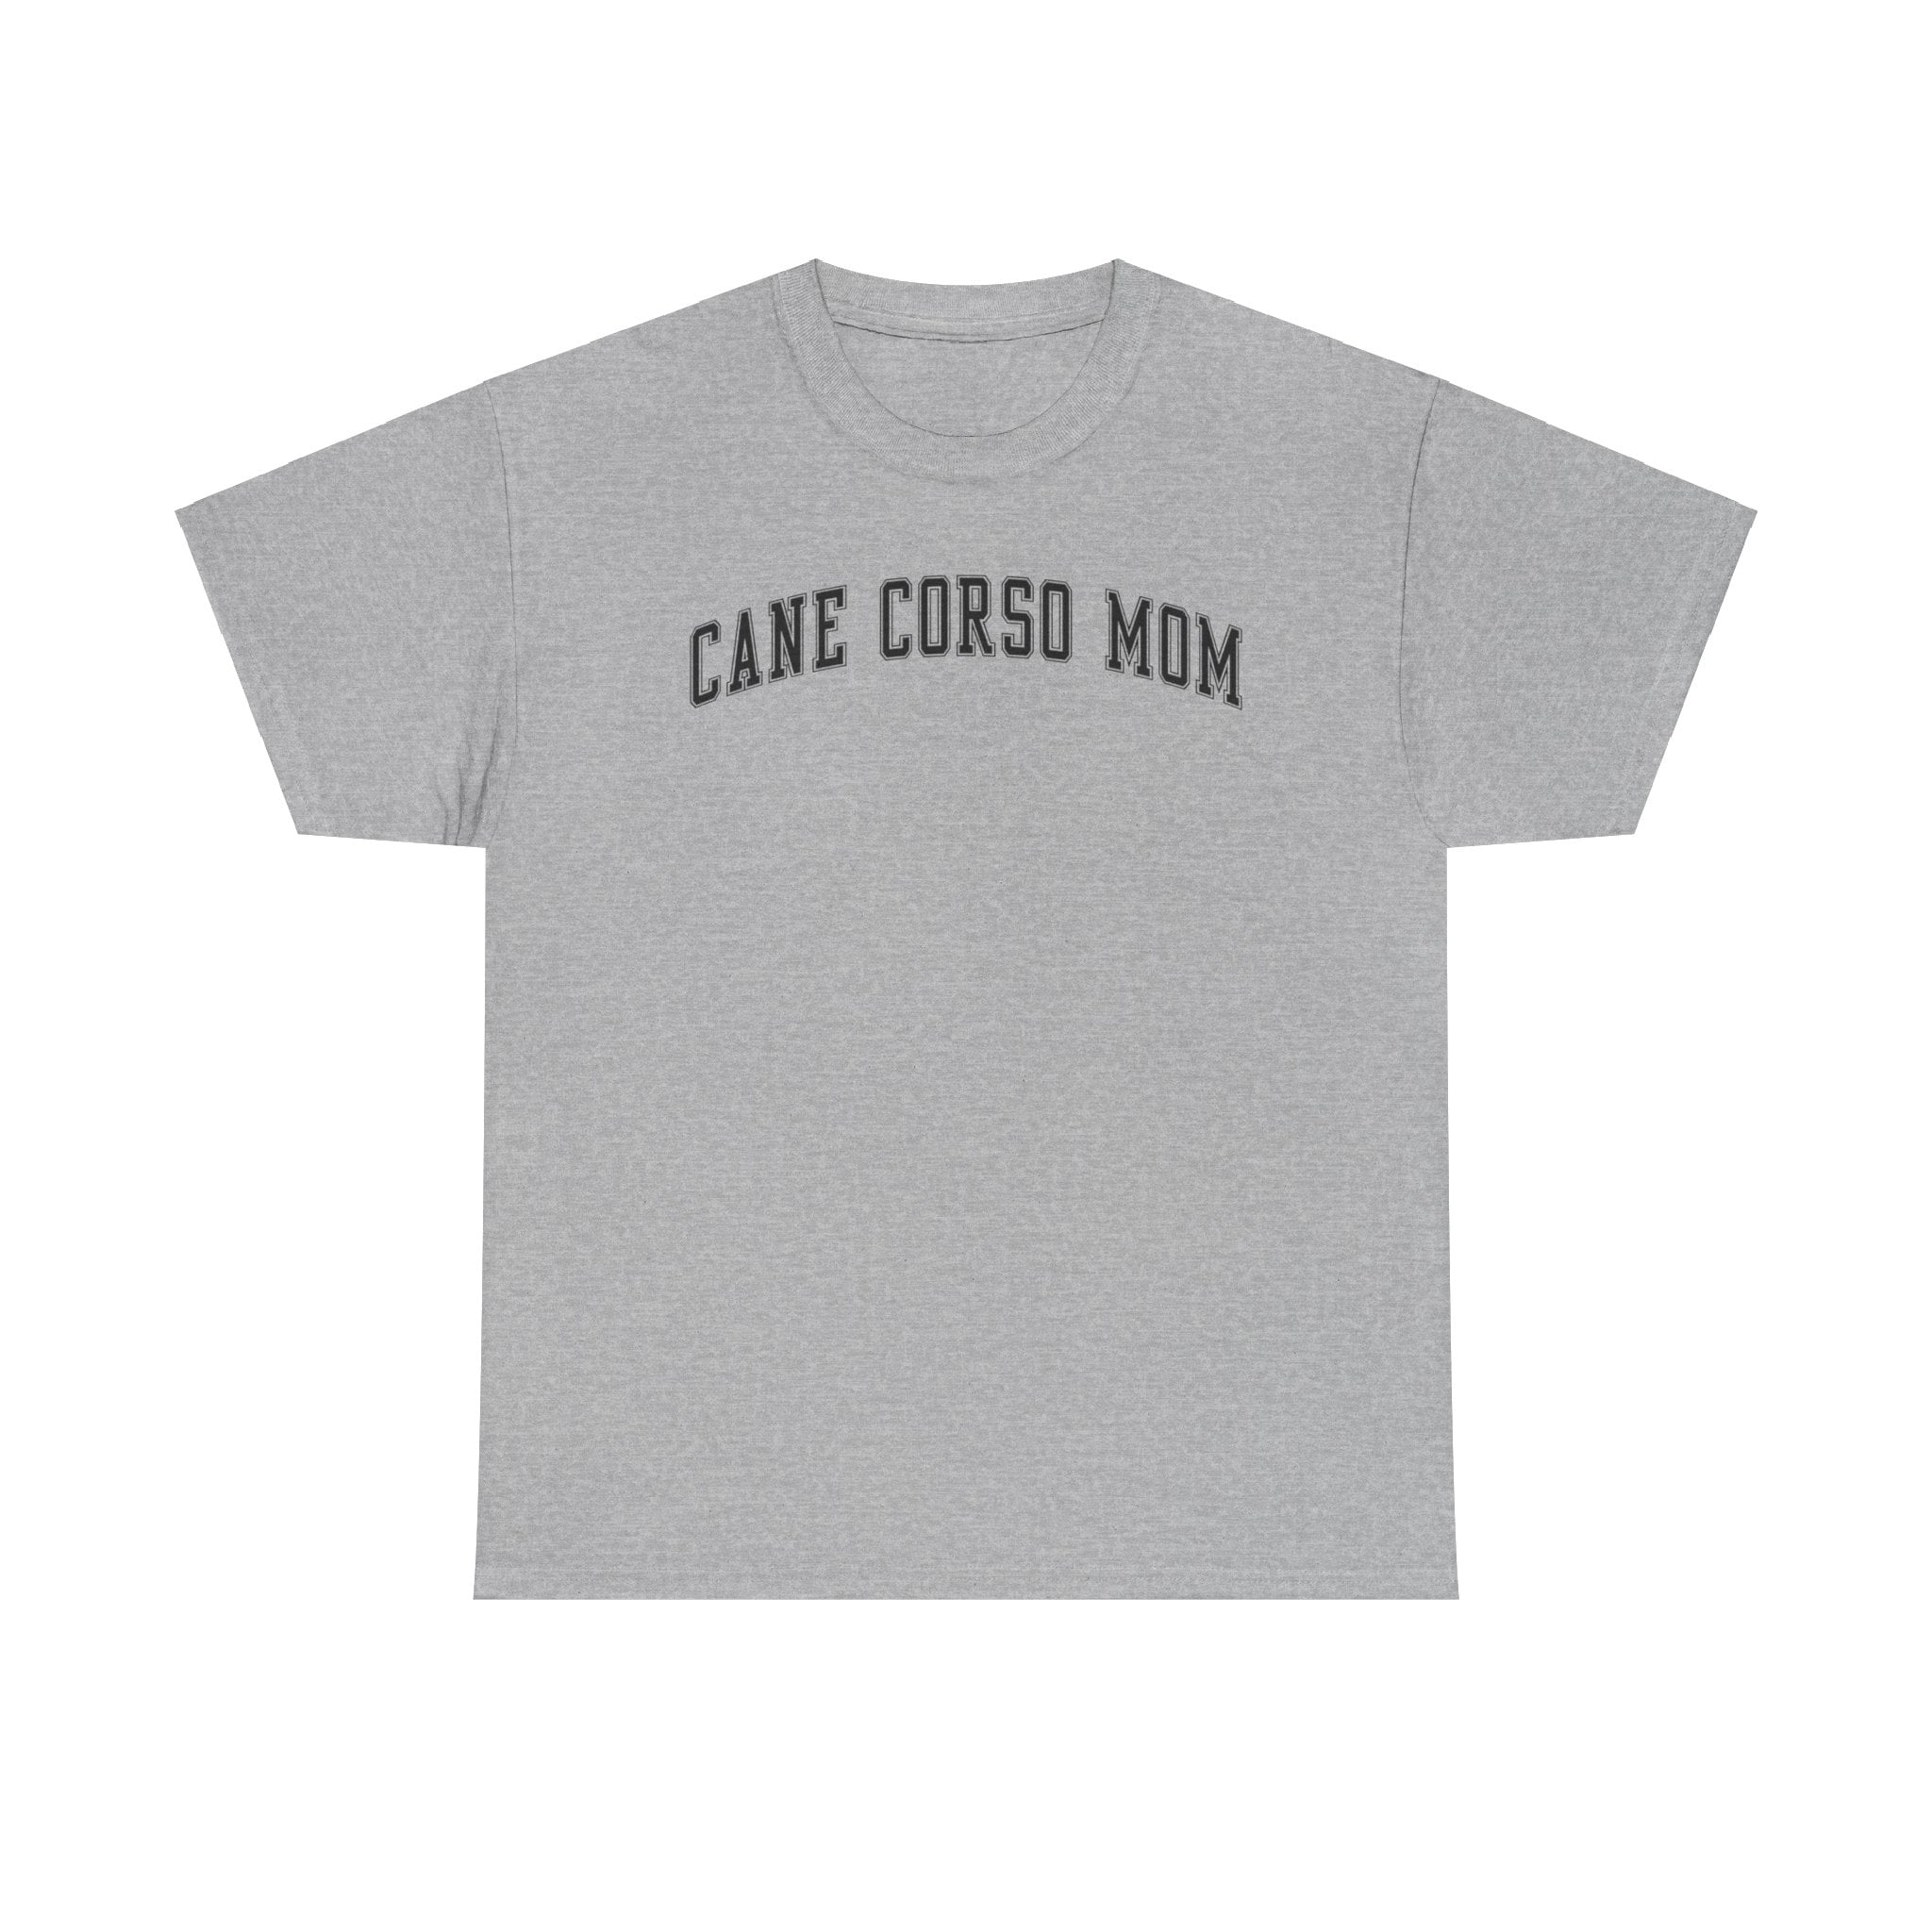 Cane Corso Mom Mother's Day Shirt Gifts Tshirt Crew Neck Short Sleeve ...